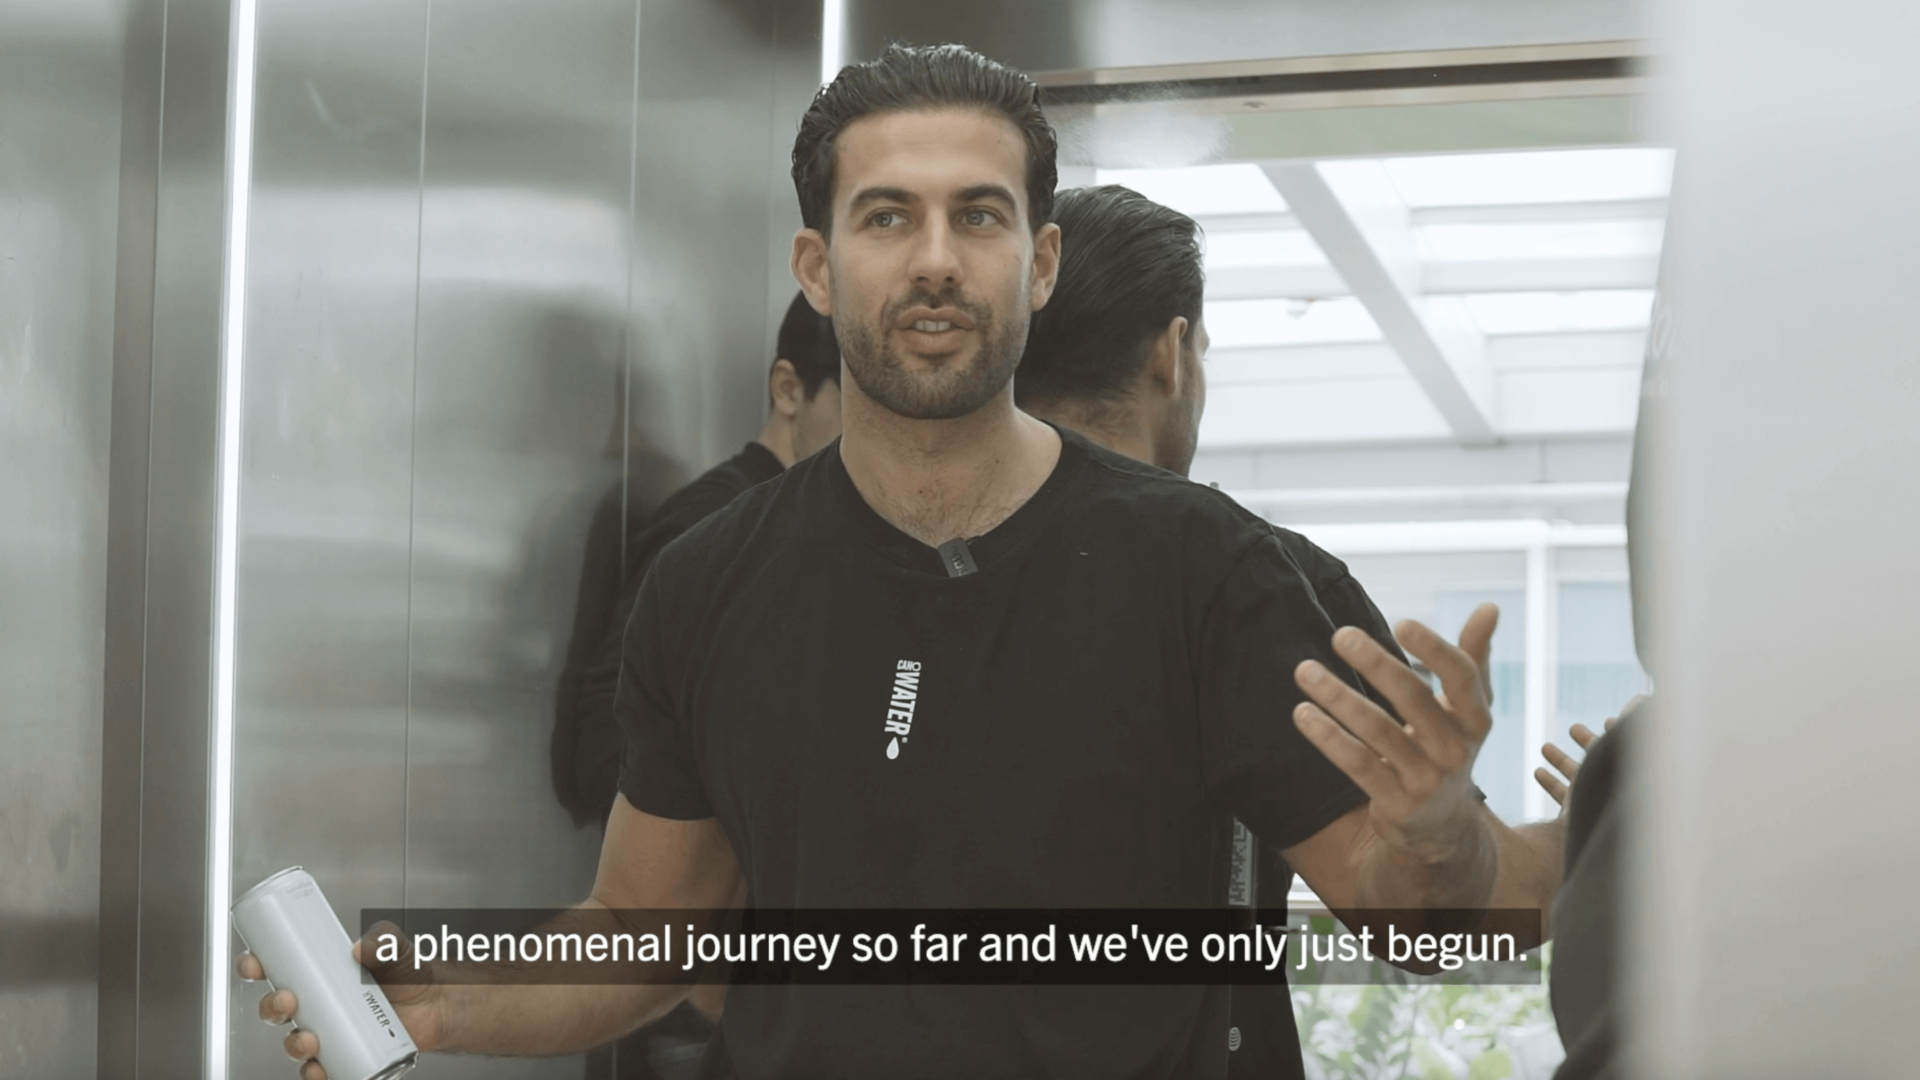 PING! TechRound Launches Elevator Pitch Youtube Series in Collaboration with WeWork